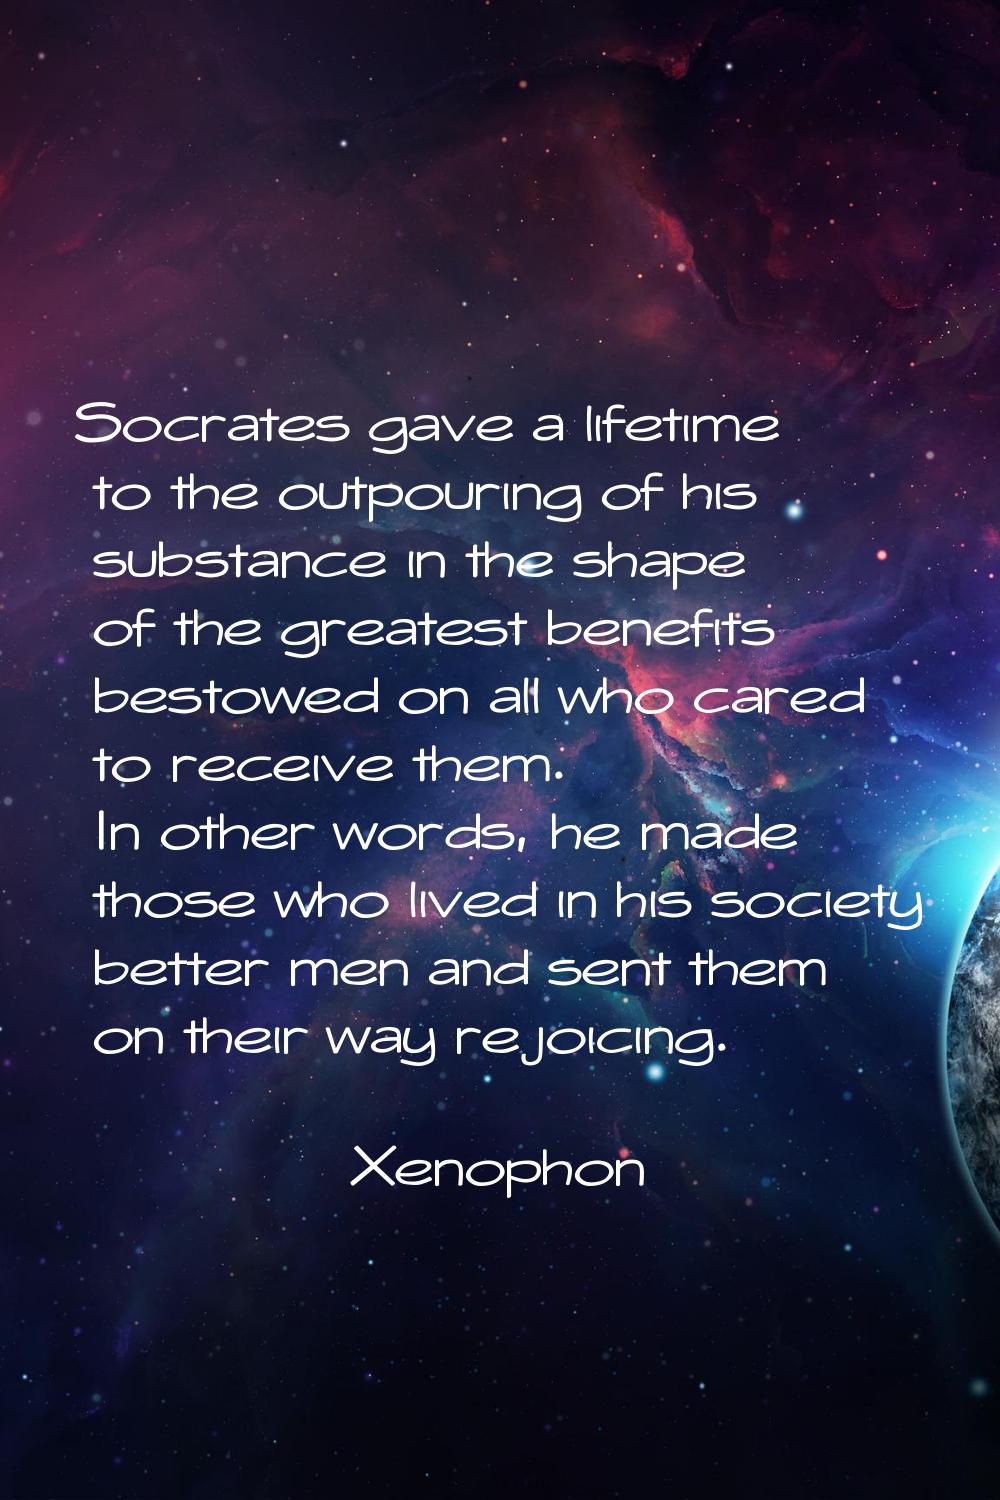 Socrates gave a lifetime to the outpouring of his substance in the shape of the greatest benefits b